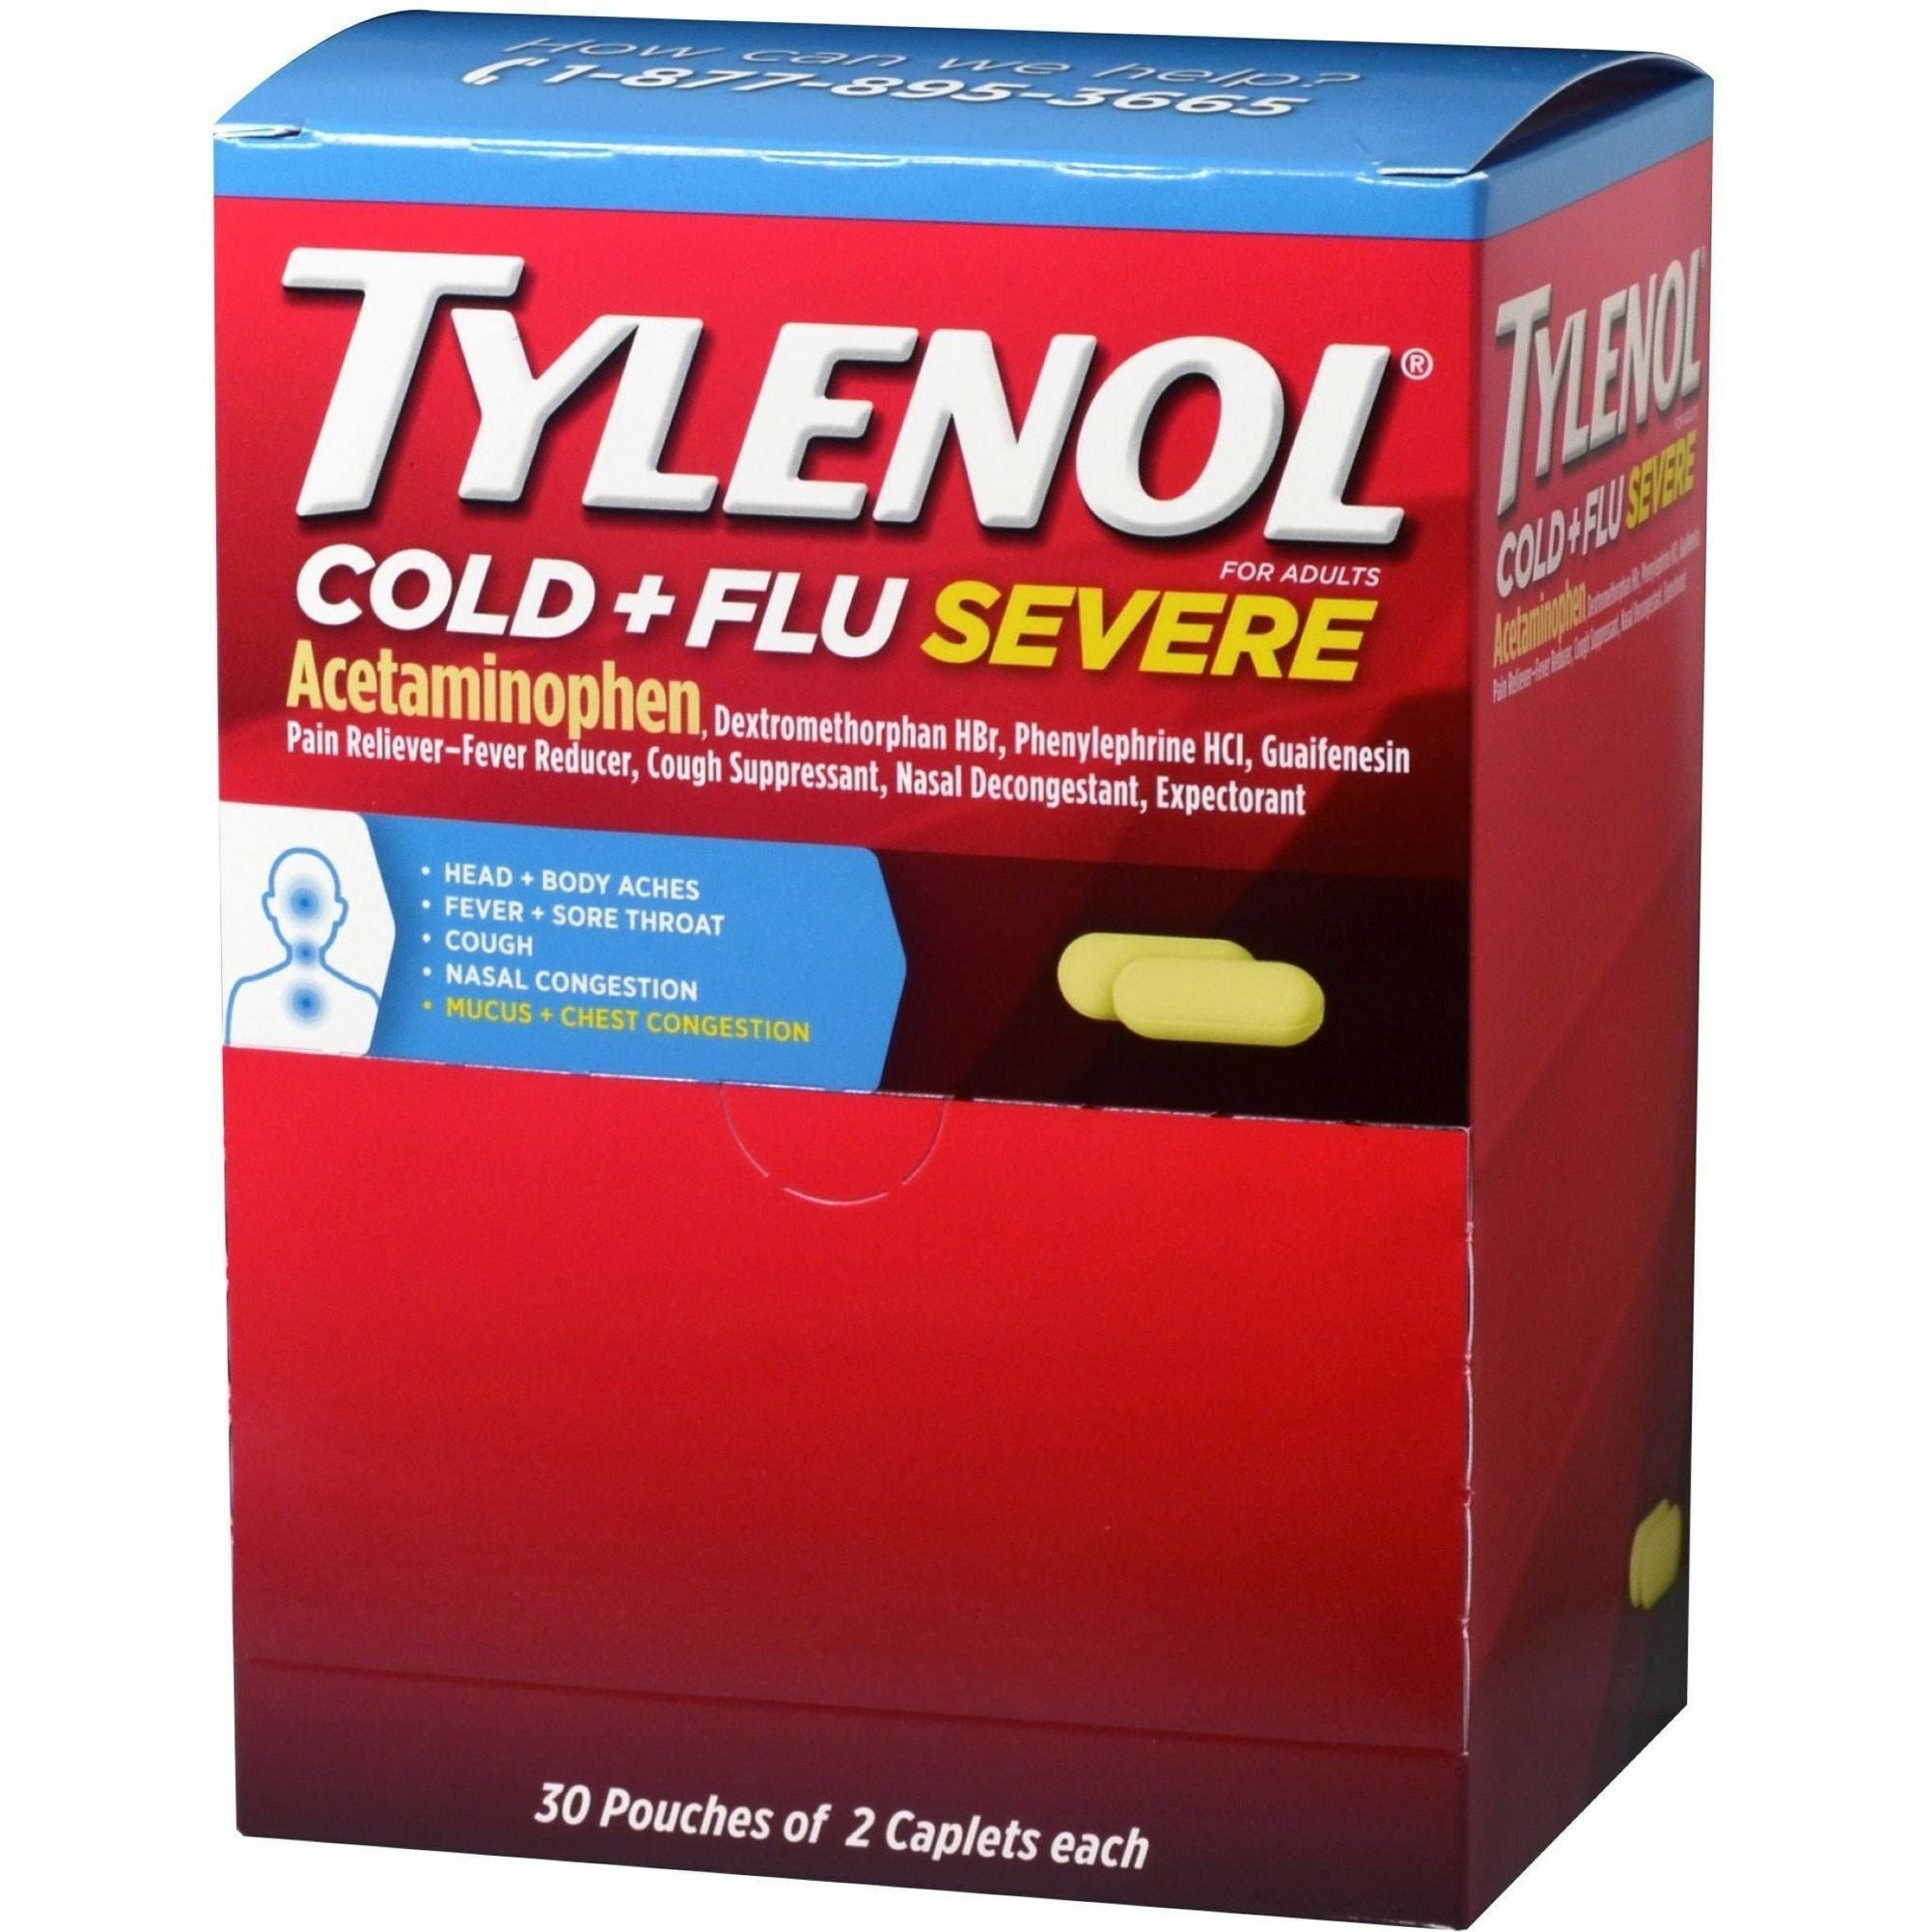 Tylenol Cold & Flu Severe Single-Dose Packets - For Tylenol Cold, Flu, Fever, Body Ache, Pain, Headache, Sore Throat, Nasal Congestion, Cough - 30 / BoxPacket - 2